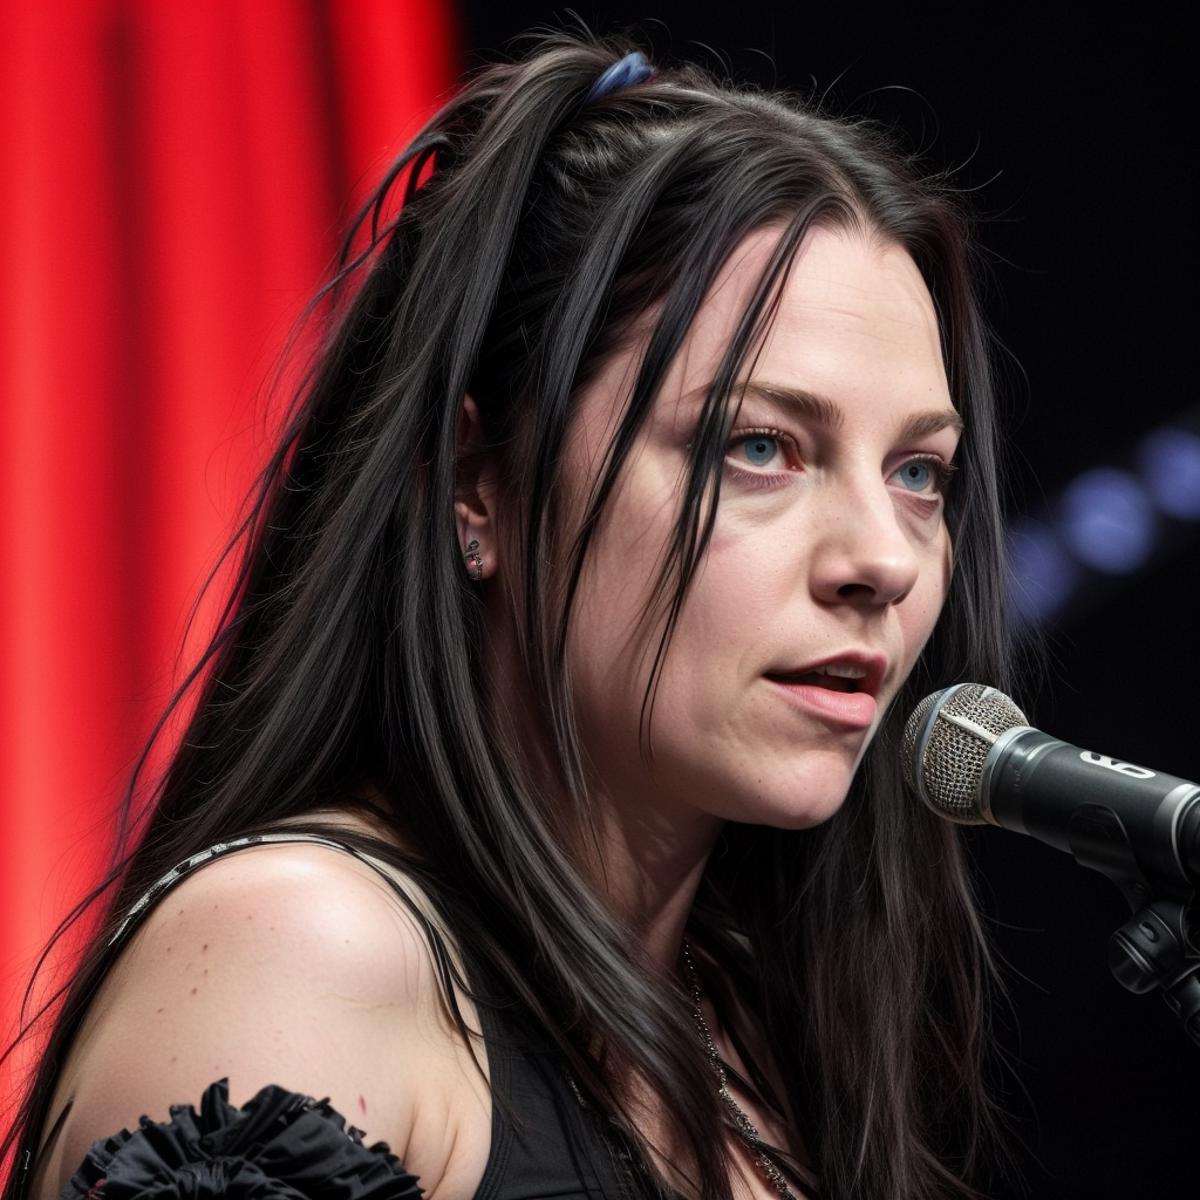 Amy Lee image by iolmstead23